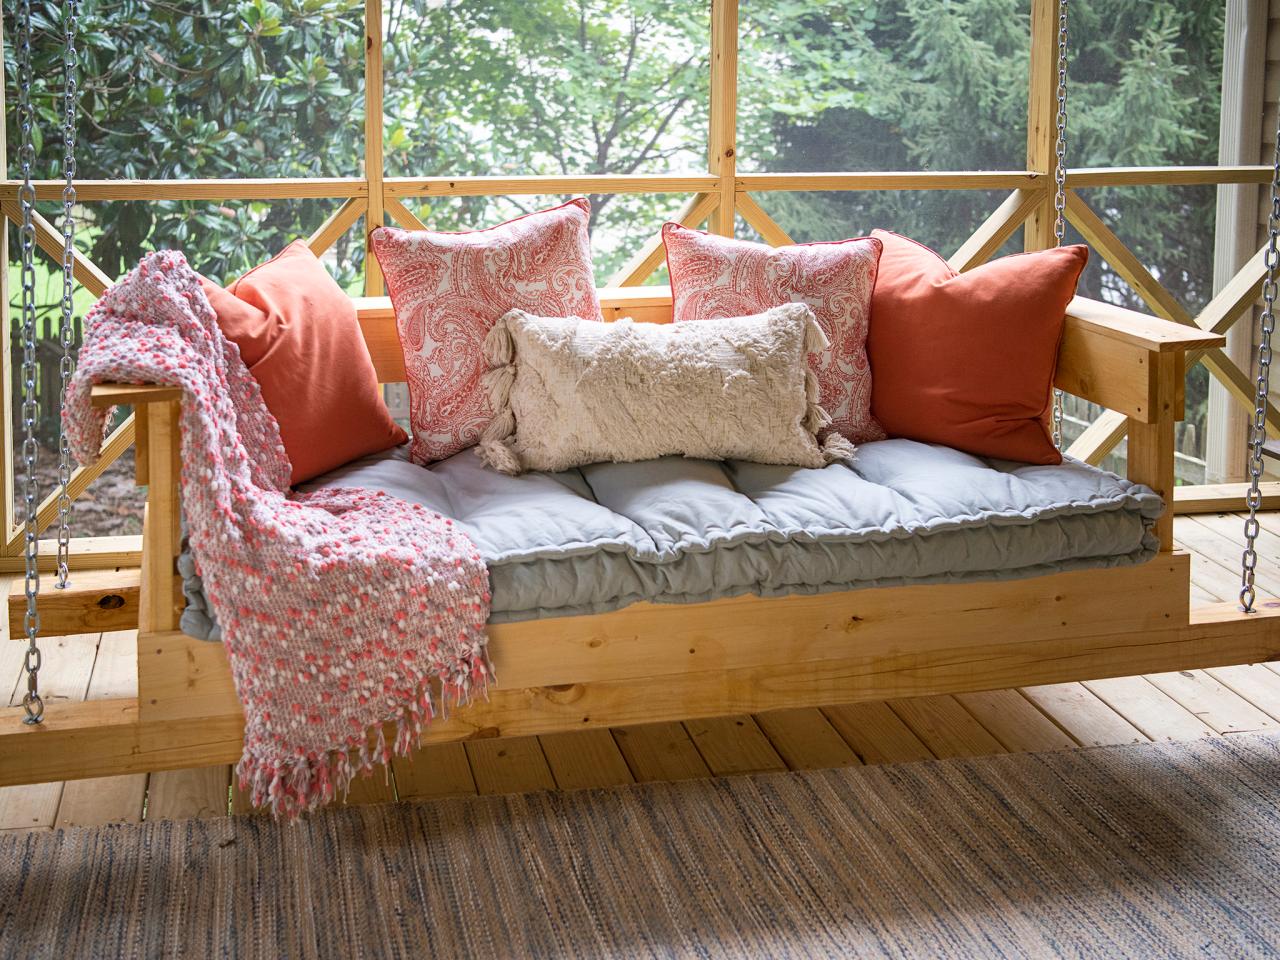 8 Daybed Porch Swing Ideas That Will Redefine Your Outdoor Space